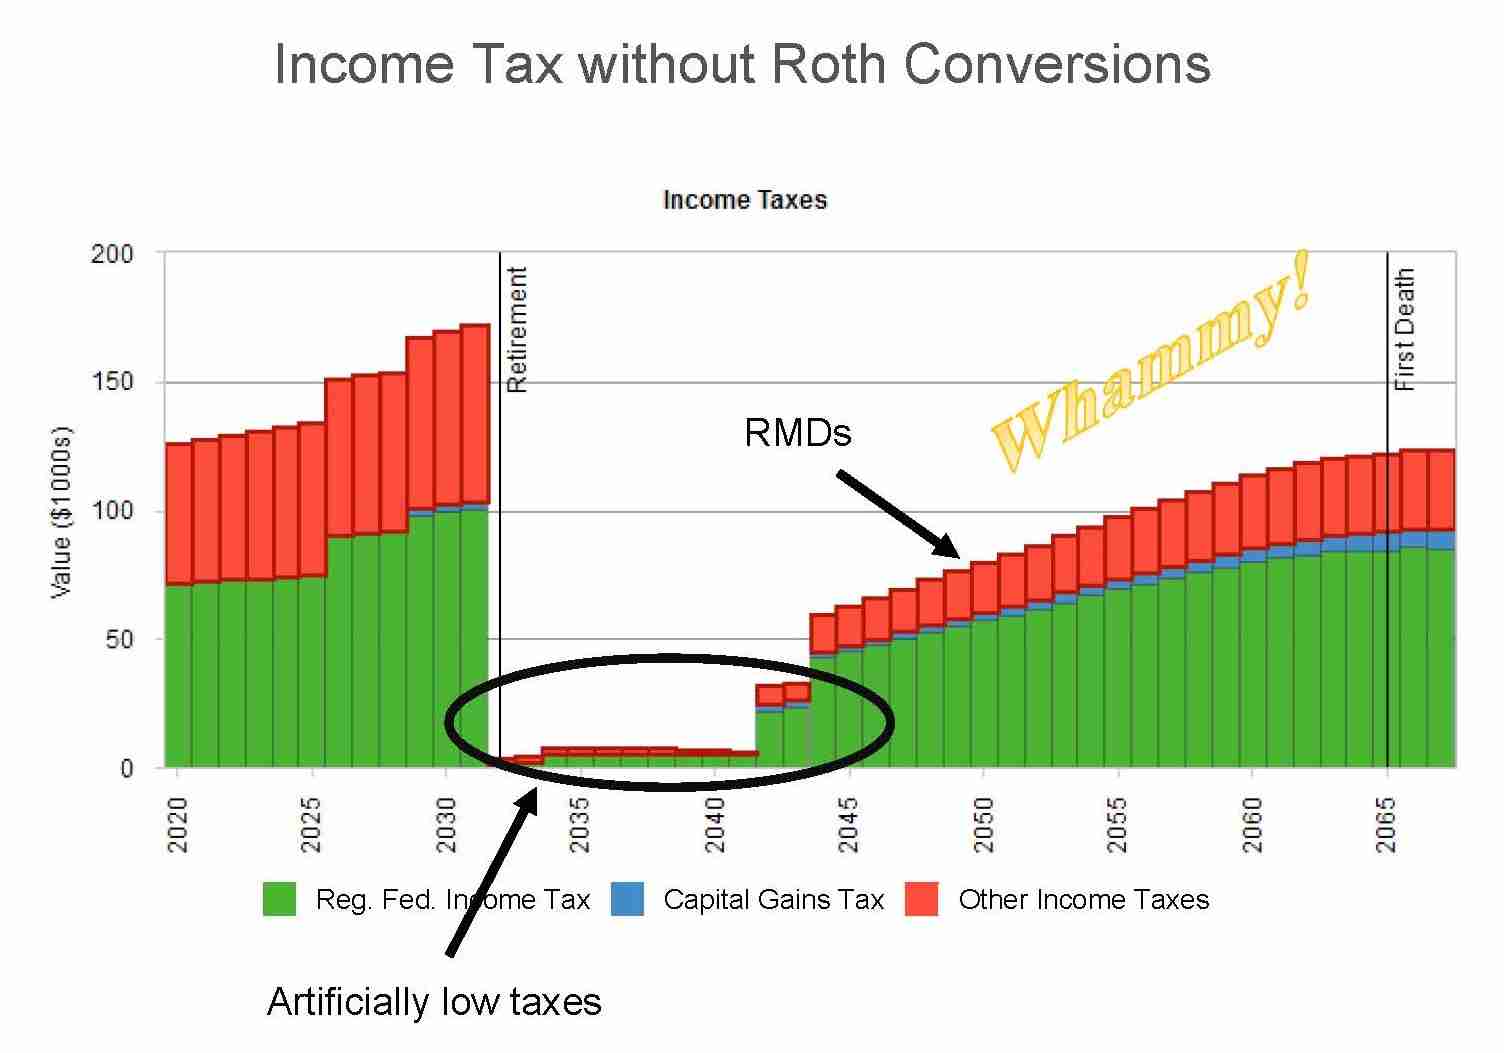 Graph of Income Taxes without Roth Conversions